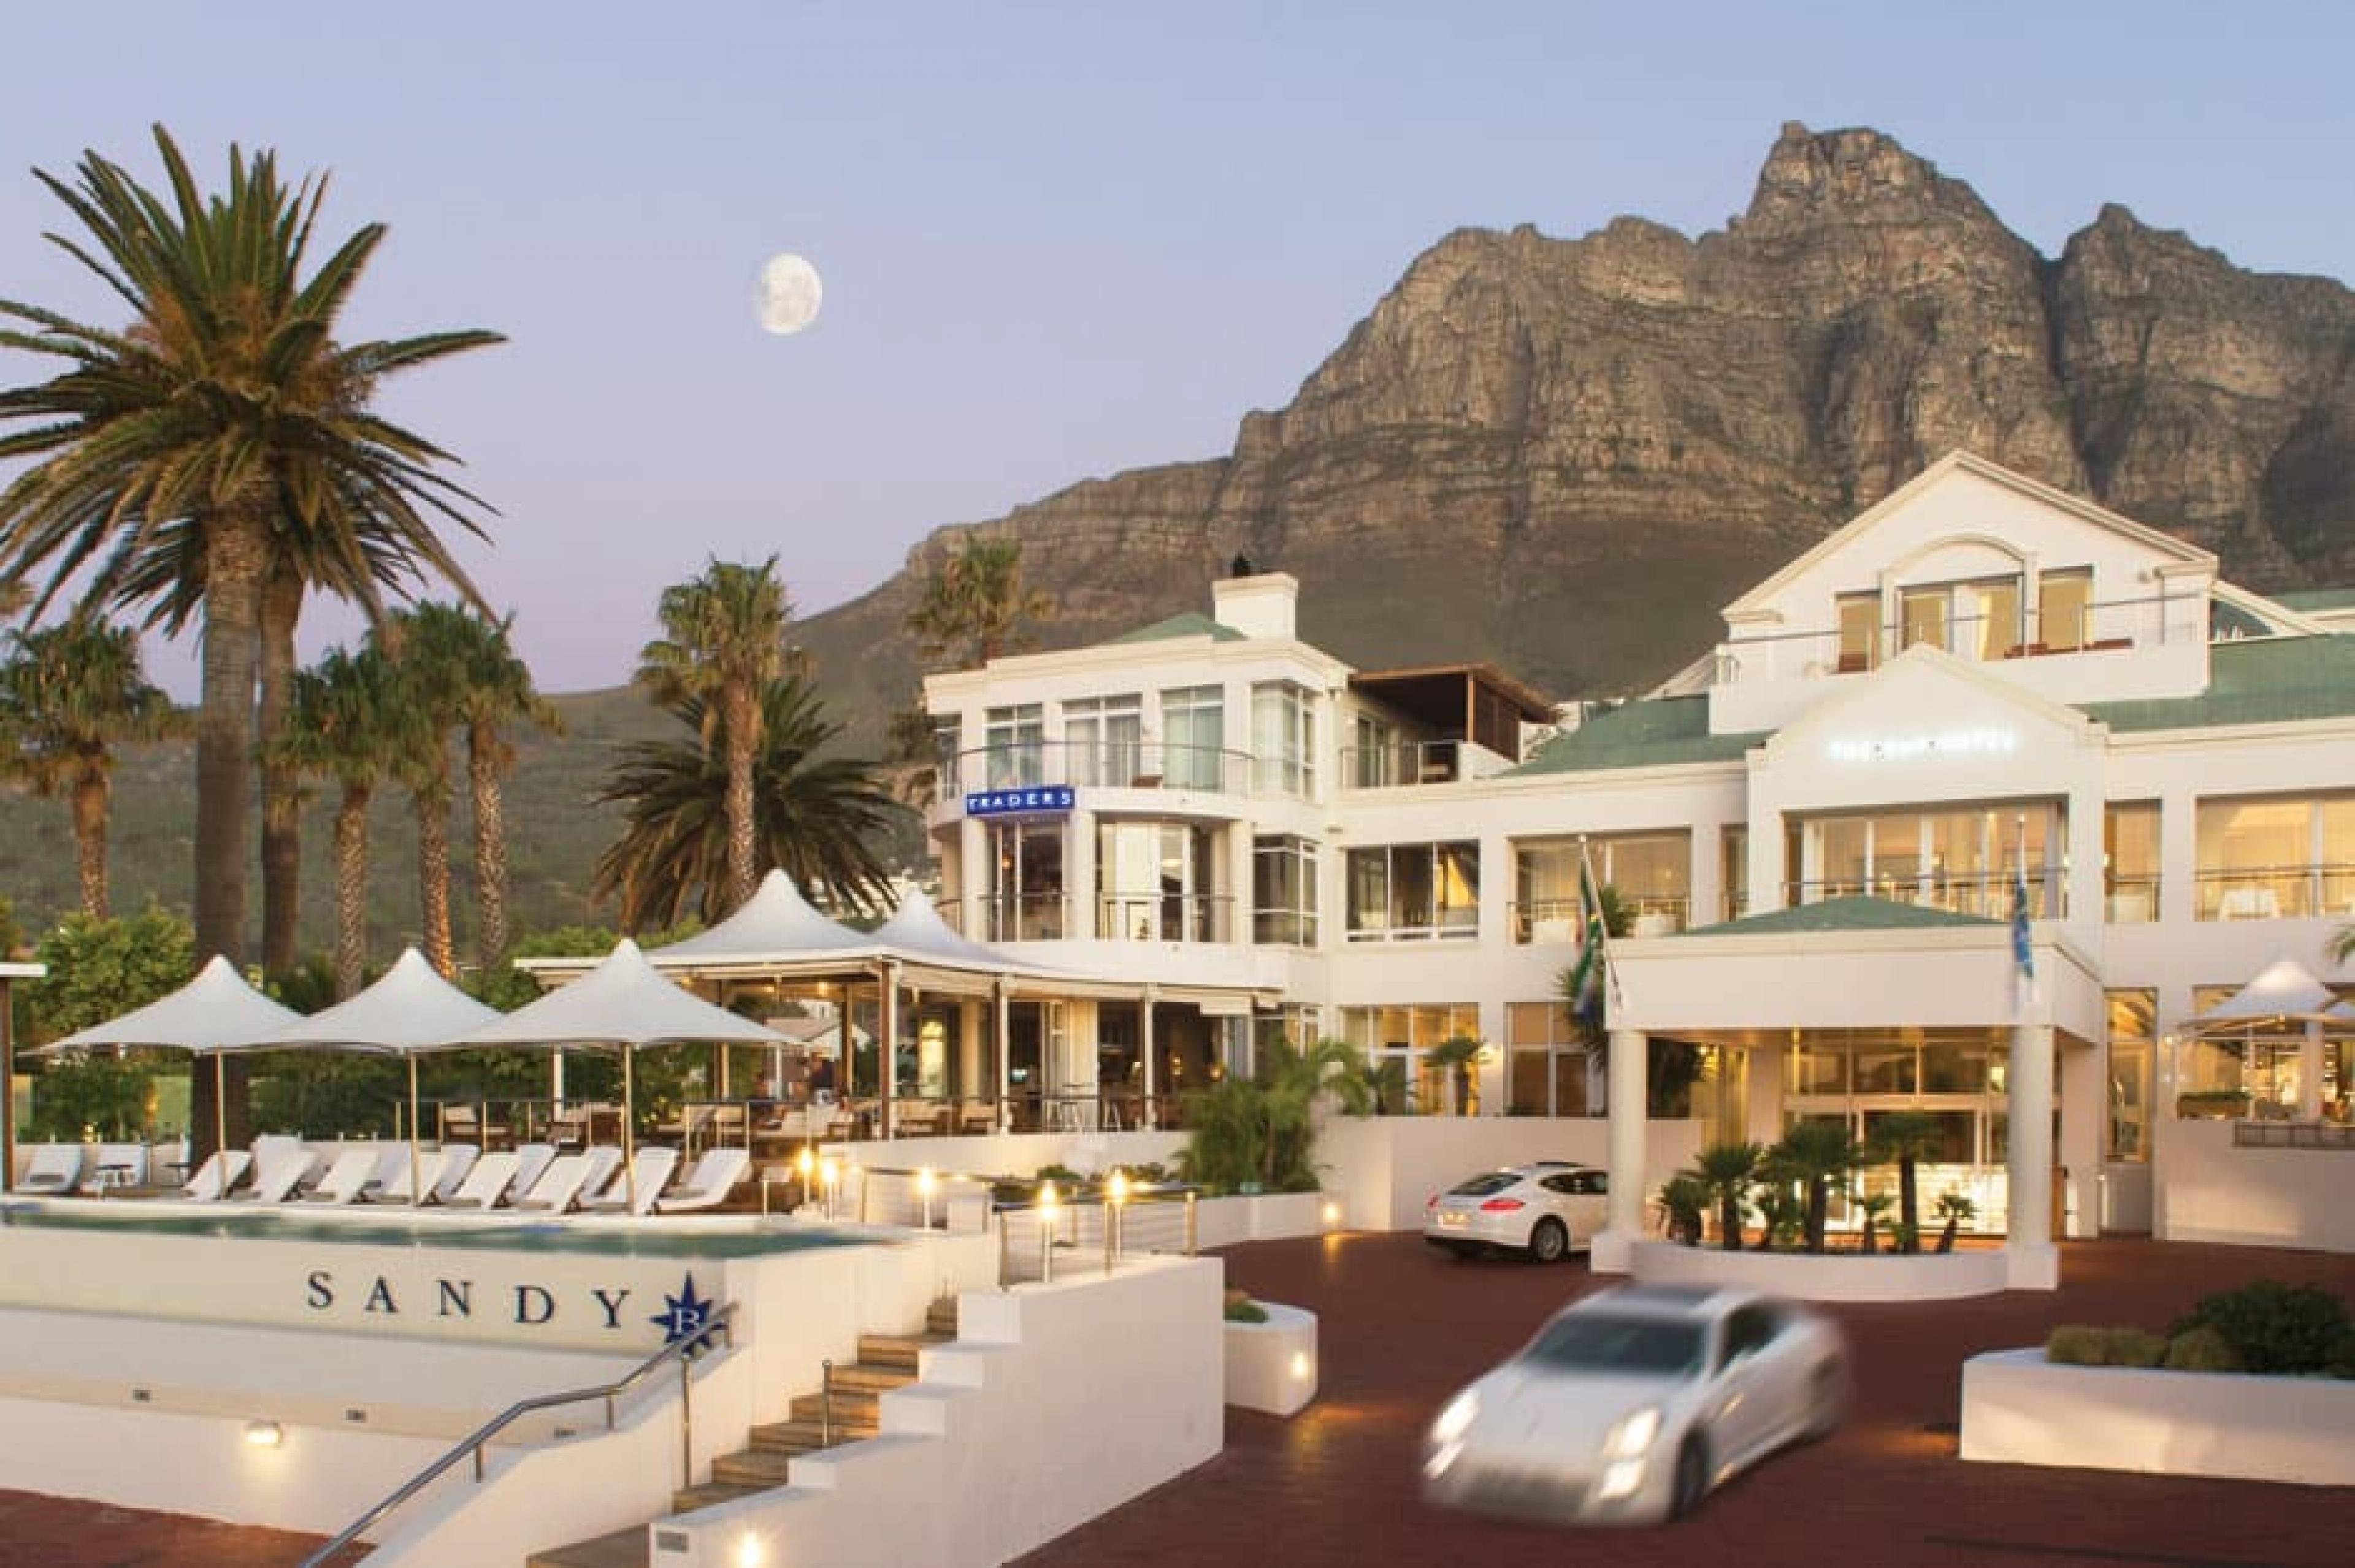 at Bay Hotel, Cape Town, South Africa